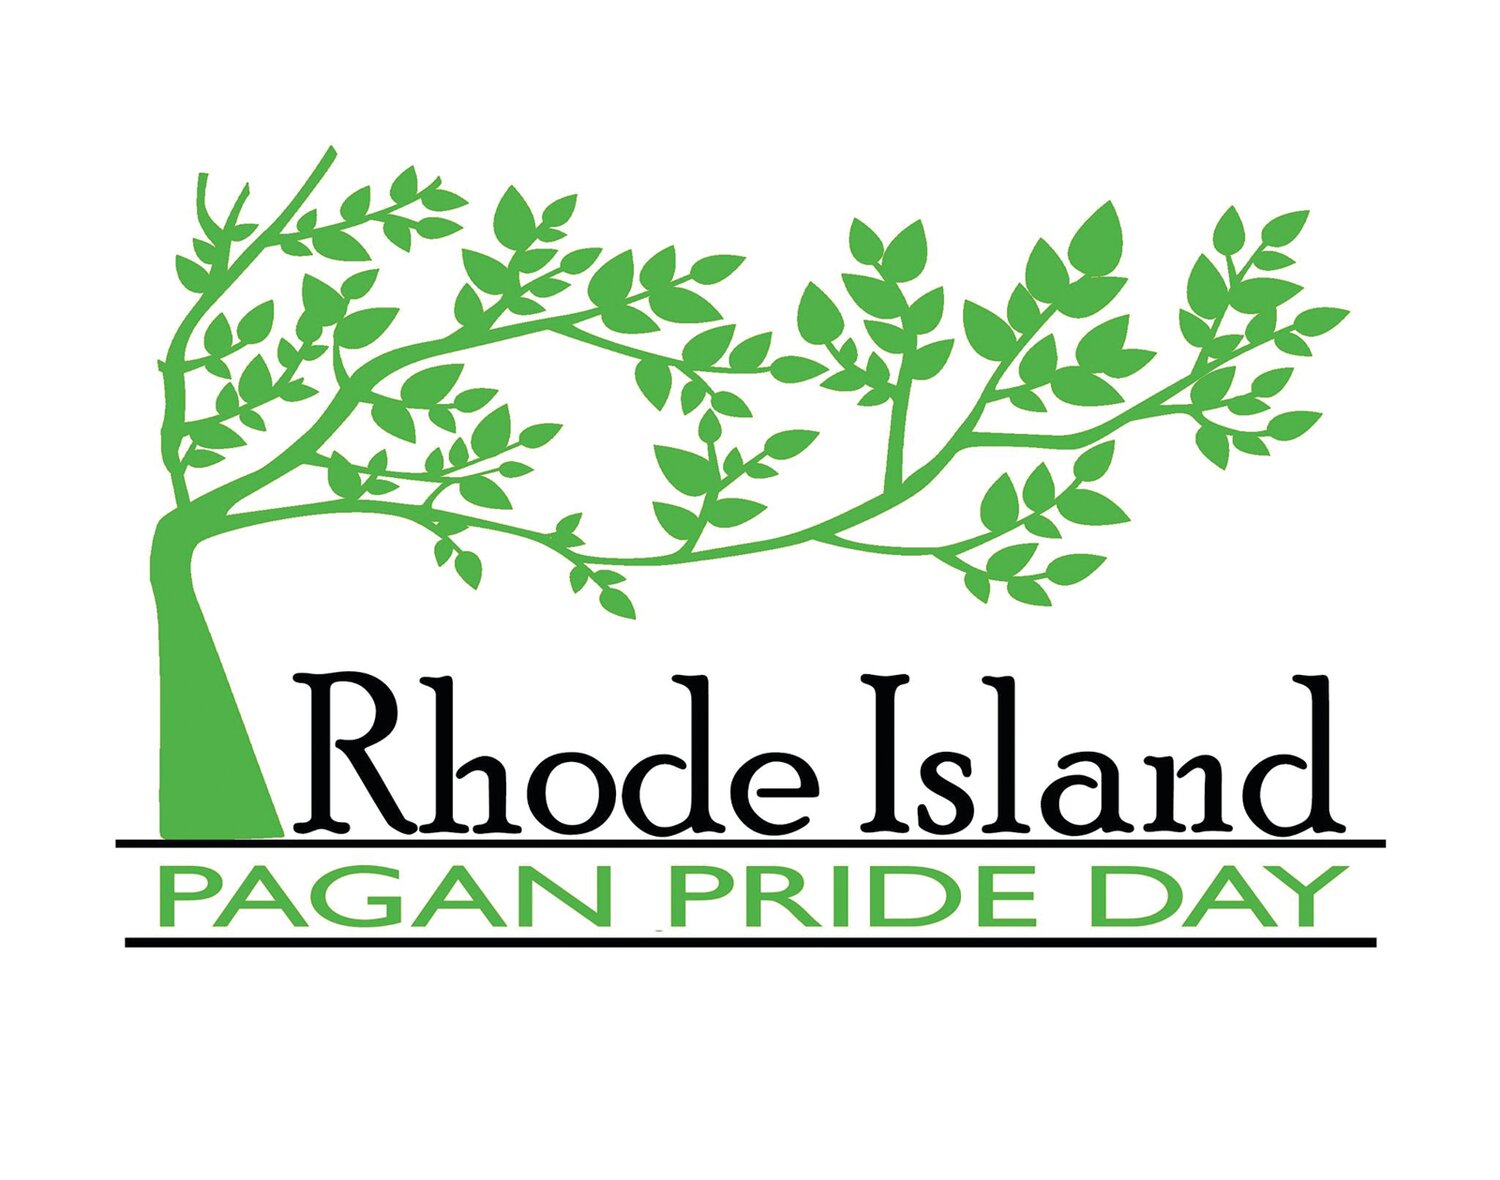 For more information about Rhode Island Pagan Pride Day, including sponsorship opportunities and event details, visit their official Rhode Island Pagan Pride Day website at www.rhodeislandpaganpride.org.